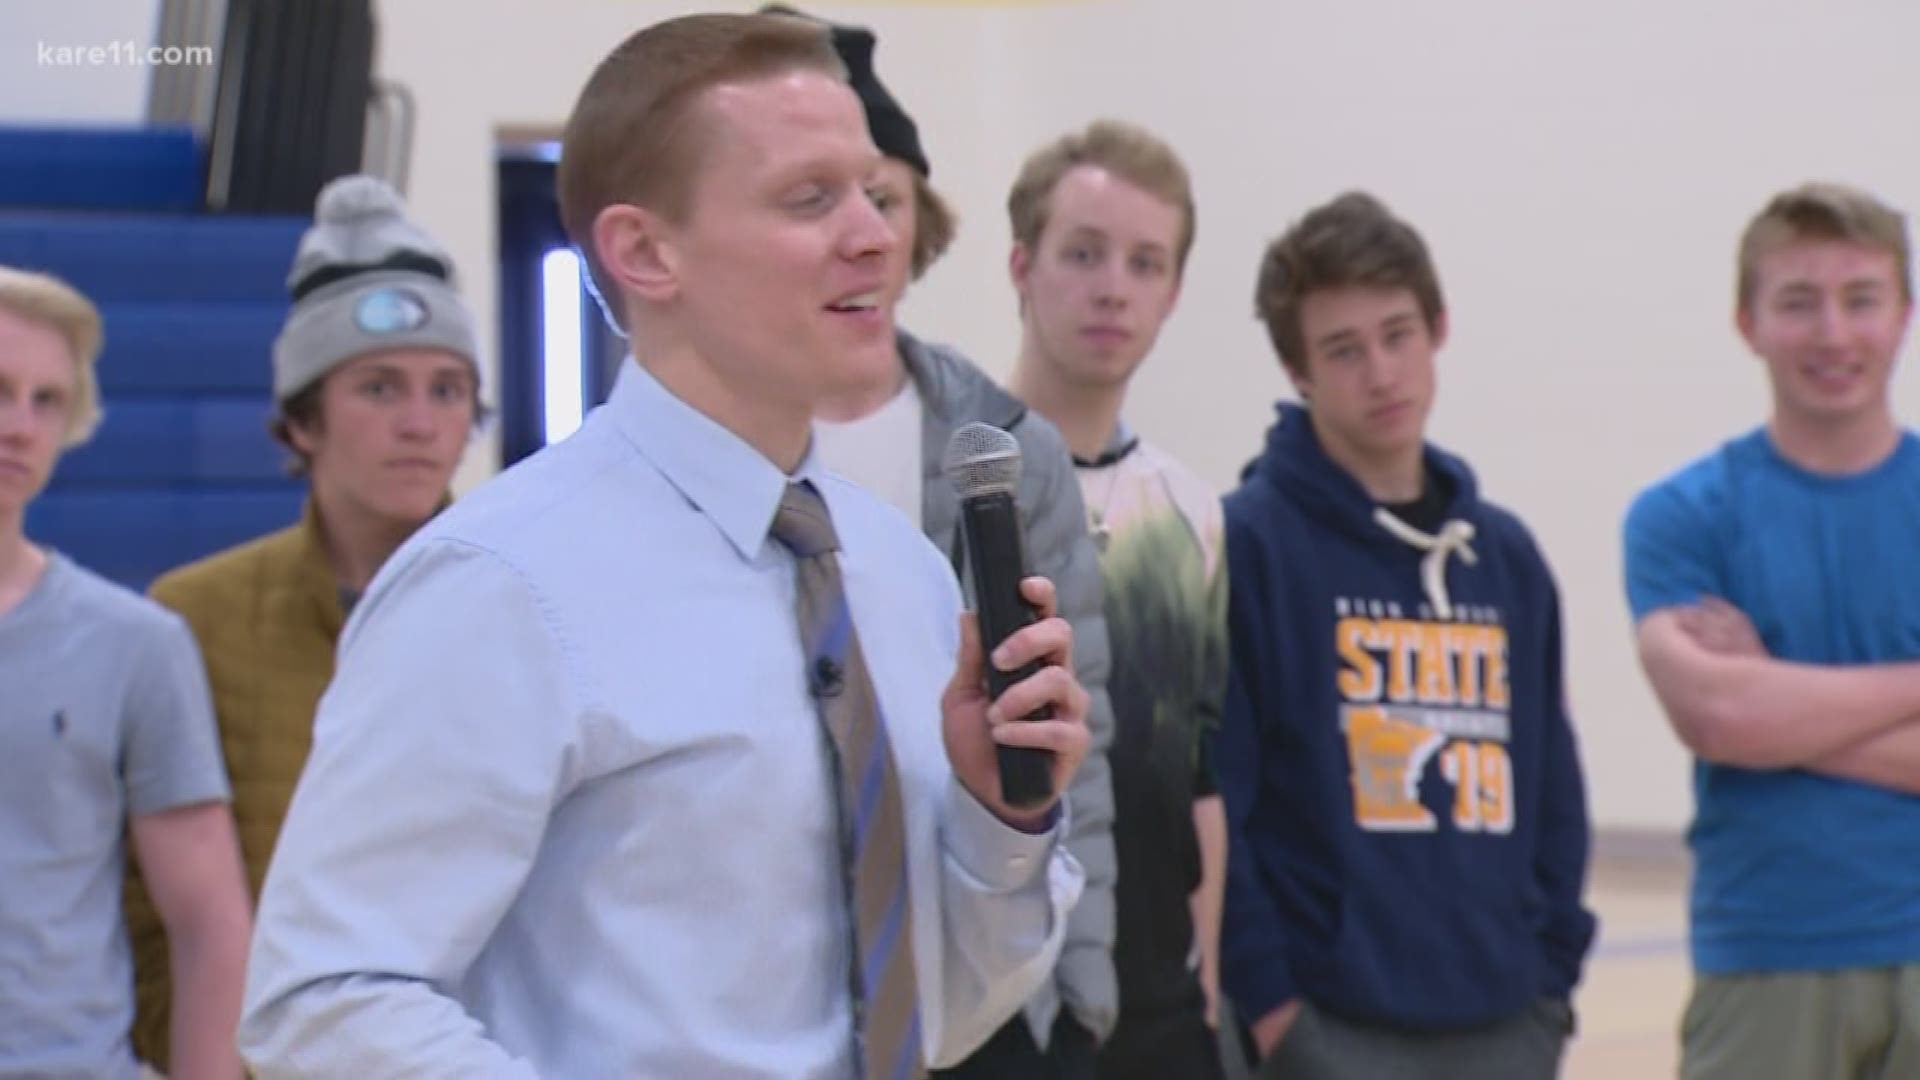 The members of the Minnesota high school hockey team that started their school year by shaving their heads arrived back at school to a standing ovation Monday.